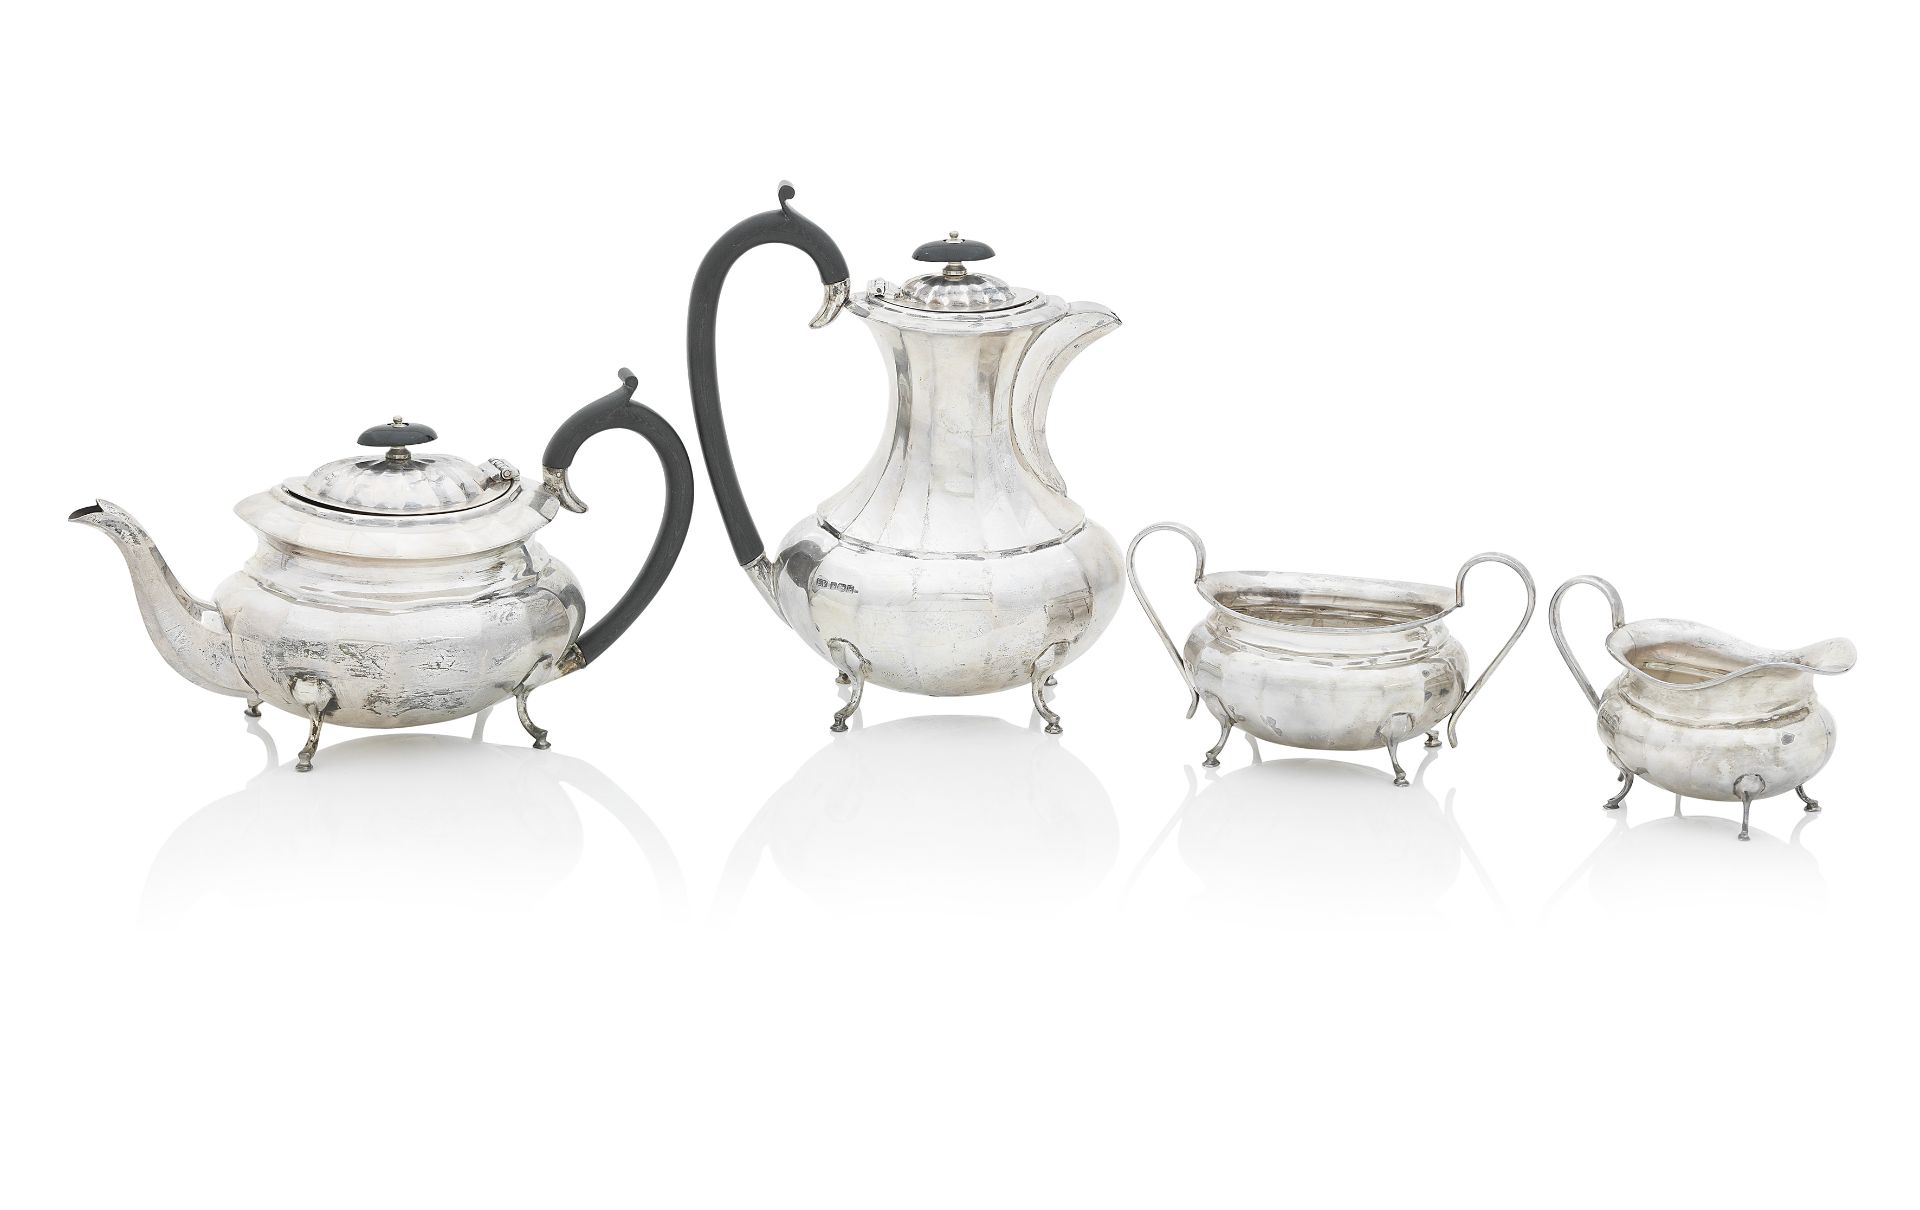 A Four Piece Tea and Coffee Service, Viner's Ltd, Sheffield, 1959